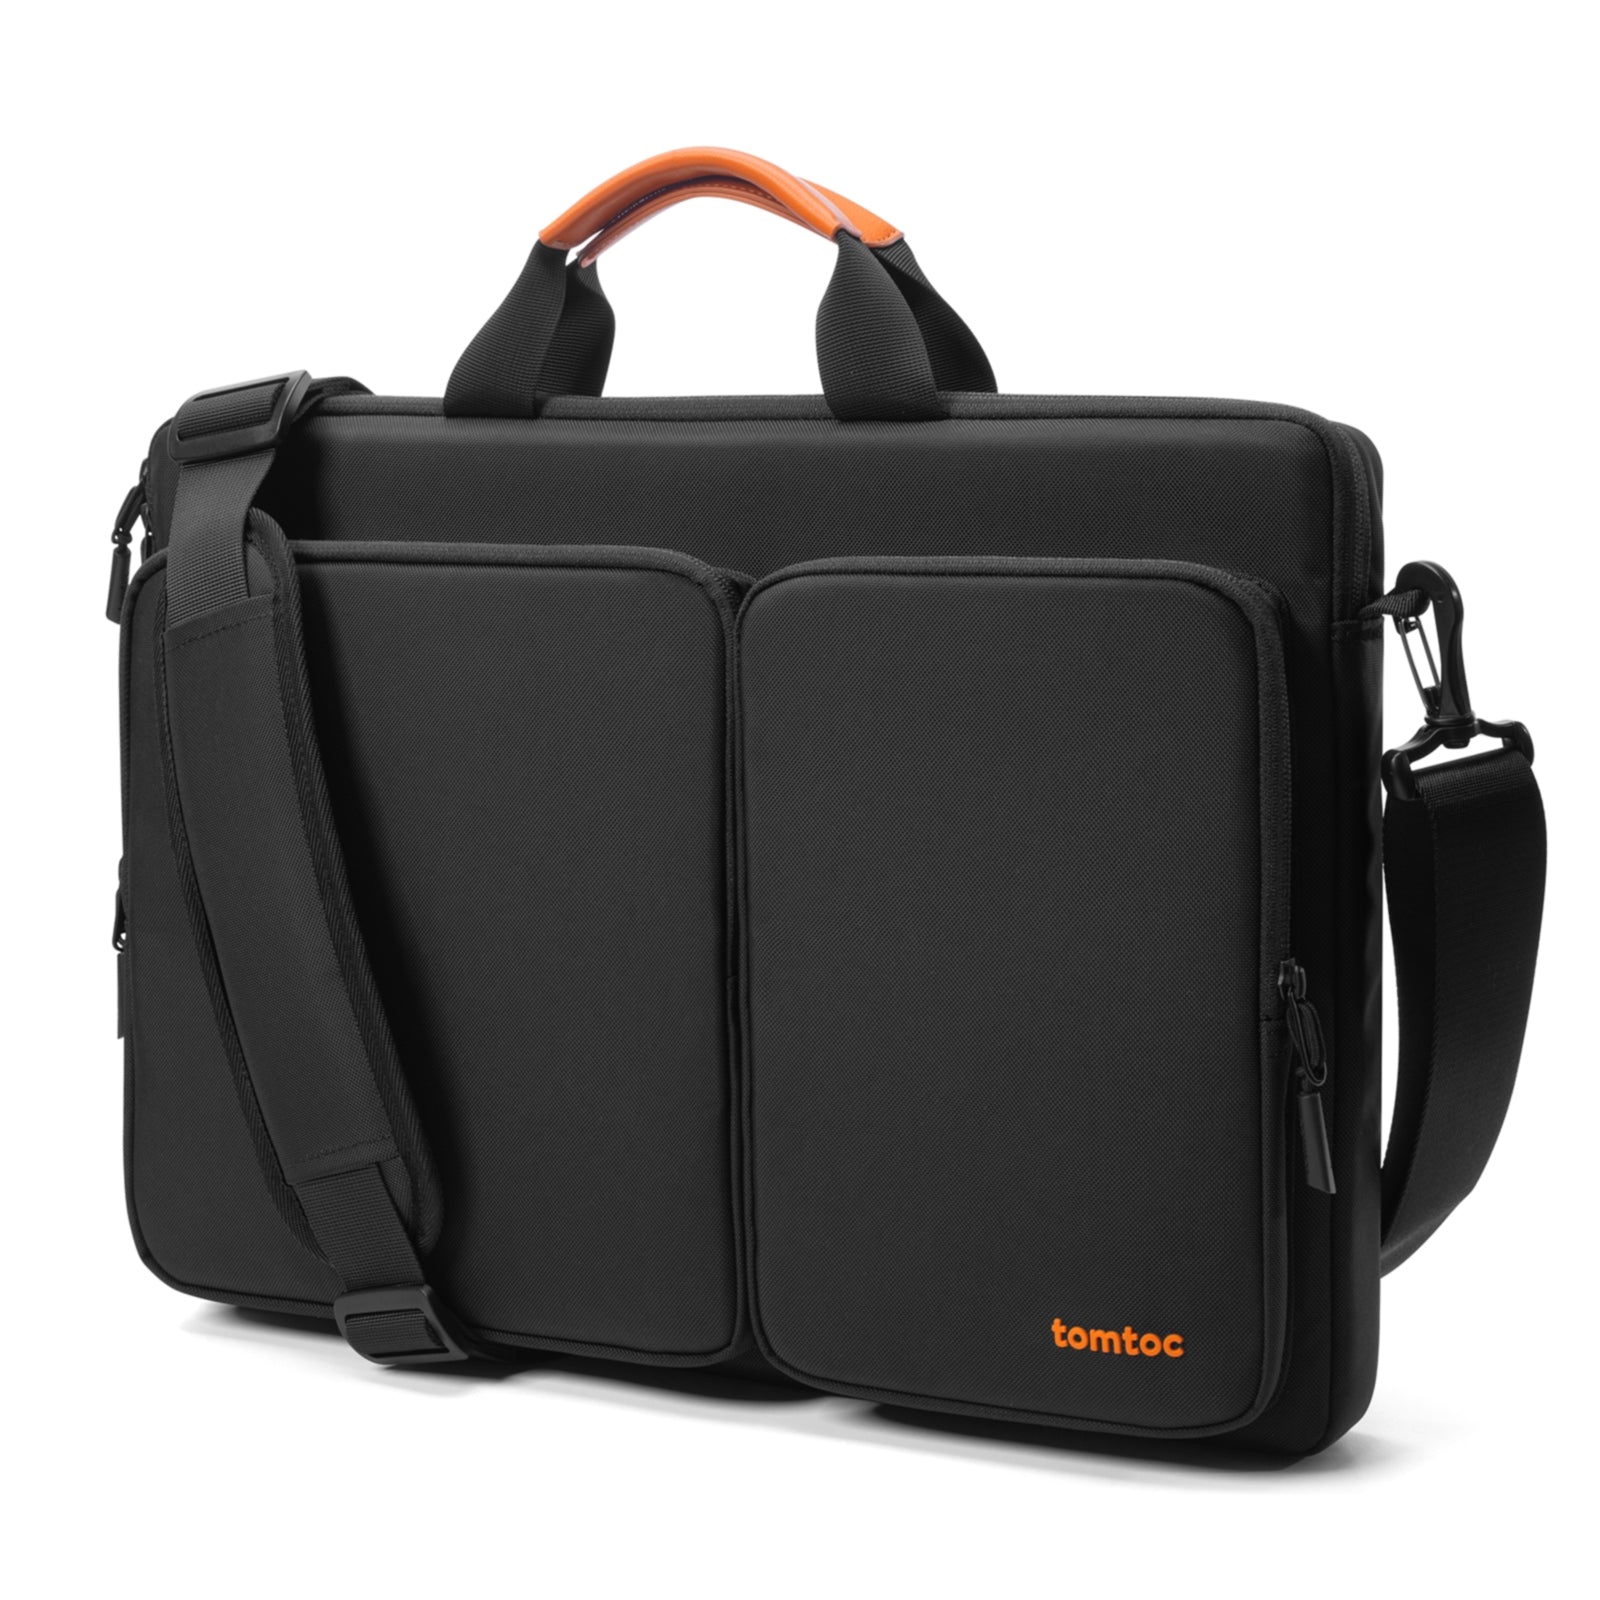 Defender-A42 Laptop Briefcase For 17-inch Gaming Laptop